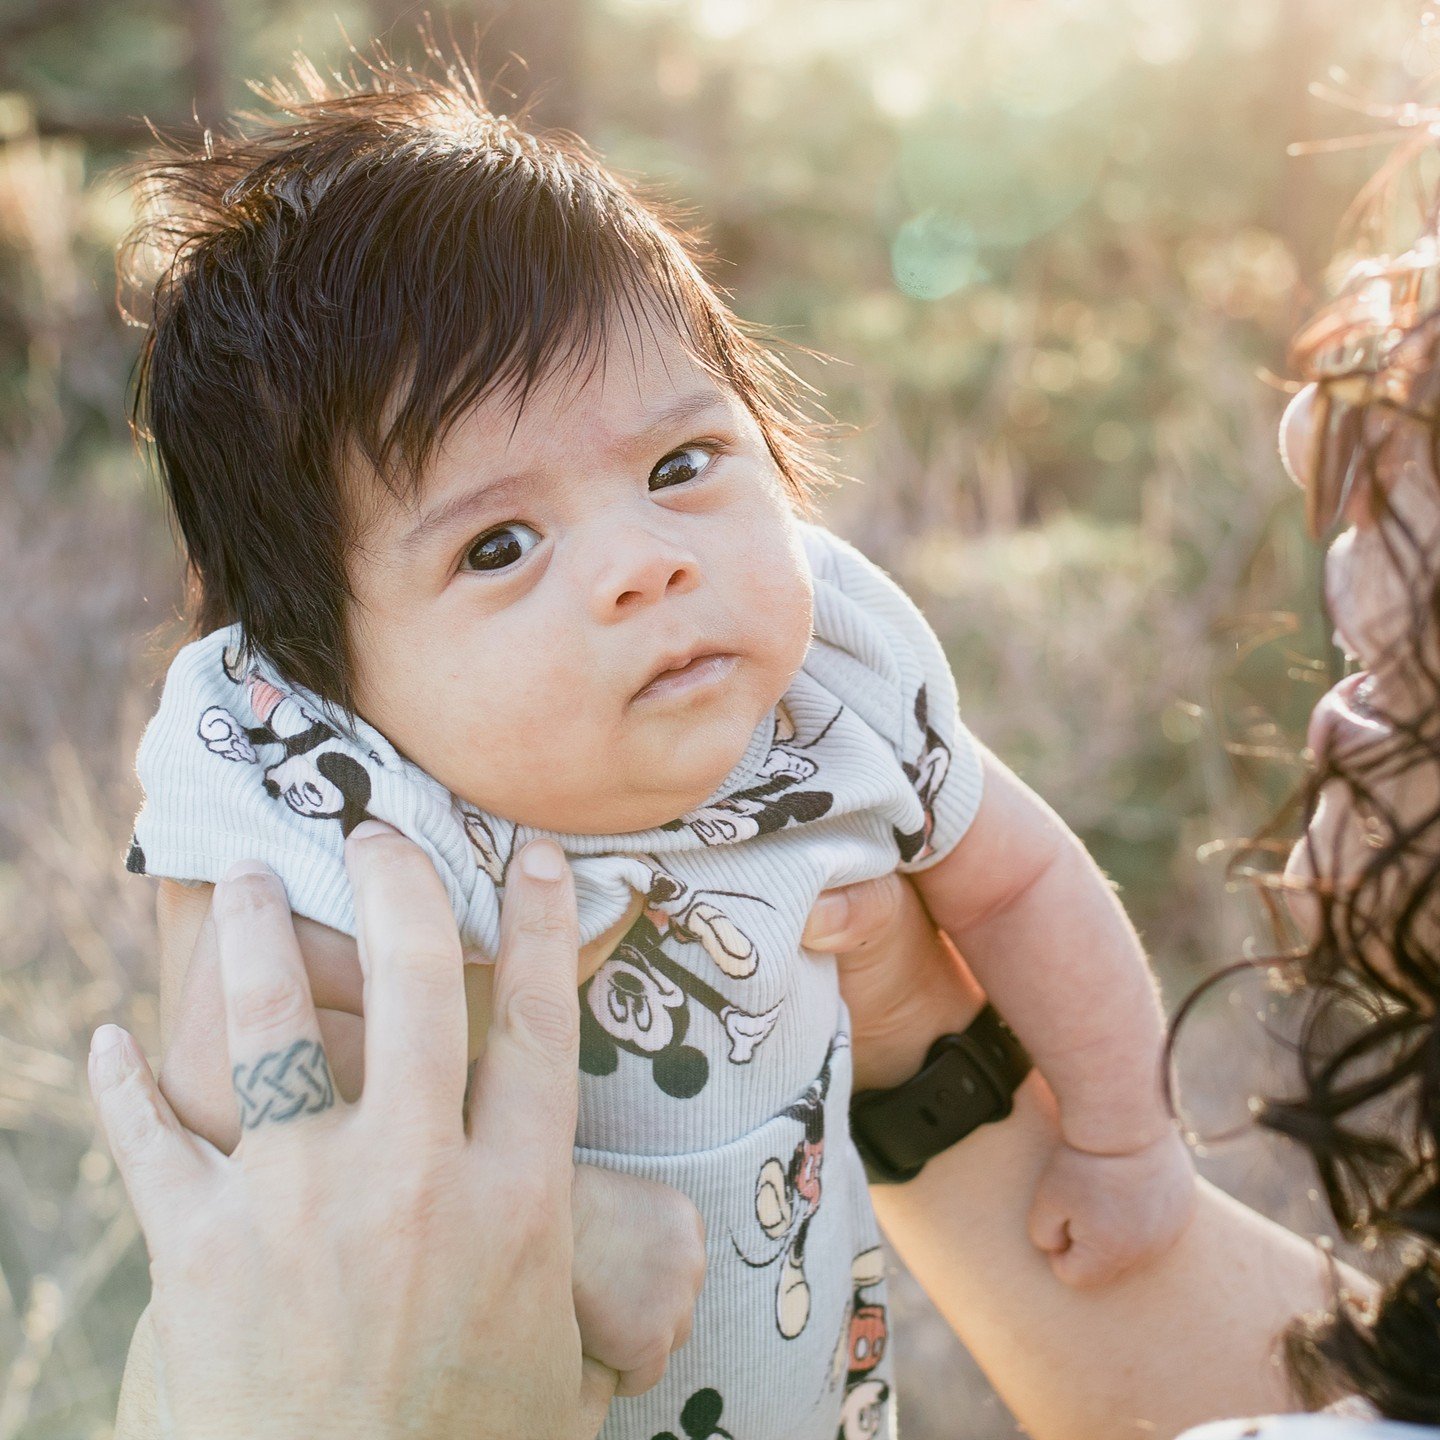 Little Miguel! This little dude has THE best hair!

#jennifernorrickphotography #motherhood #mommyandme #minisessions #mothersday #rapidcityphotographer #southdakotaphotographer #blackhillsphotographer #rapidcitymotherhoodphotographer #southdakotamot